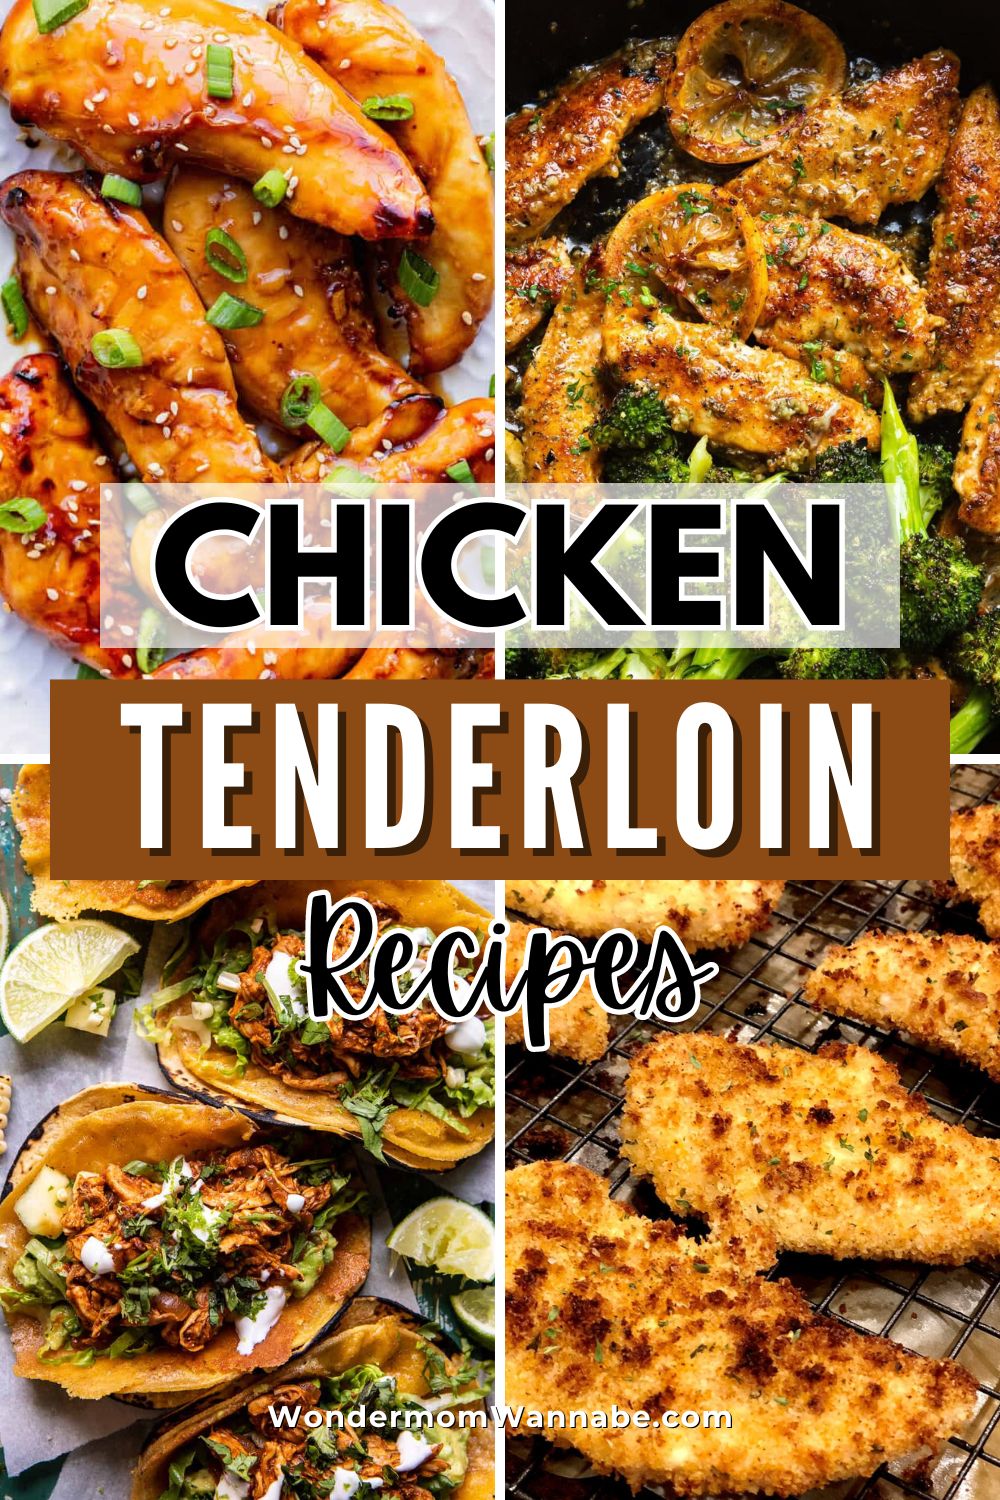 Chicken Tenderloin Recipes: Browse through a selection of mouthwatering chicken tenderloin recipes that will satisfy your taste buds. From flavorful grilled chicken tenderloins to crispy baked creations, these chicken